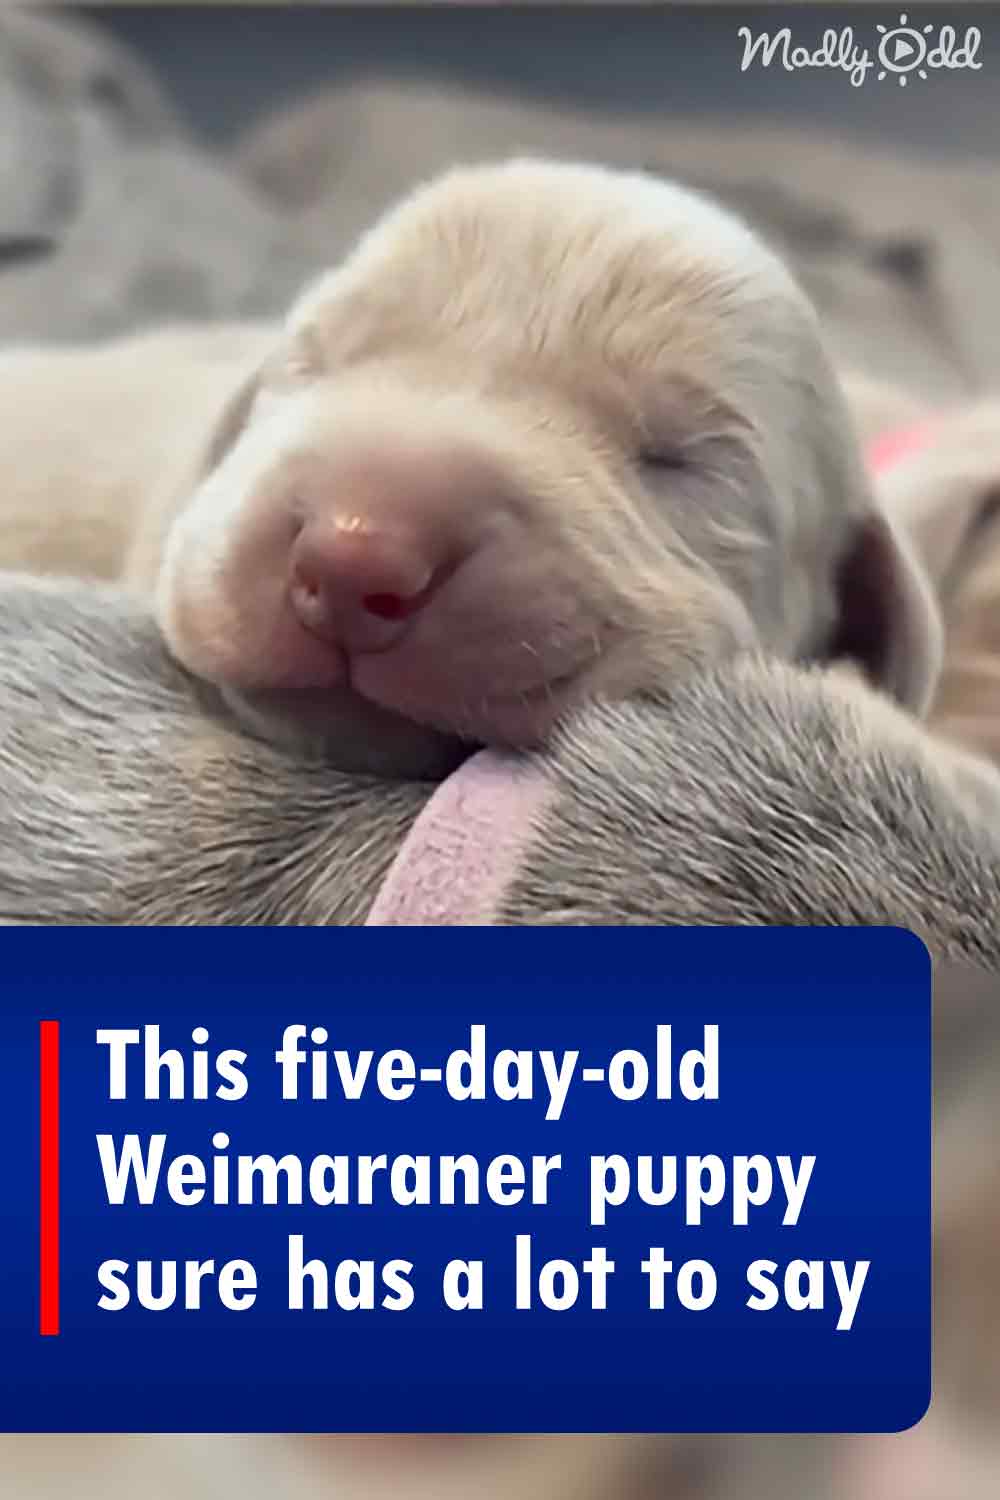 This five-day-old Weimaraner puppy sure has a lot to say